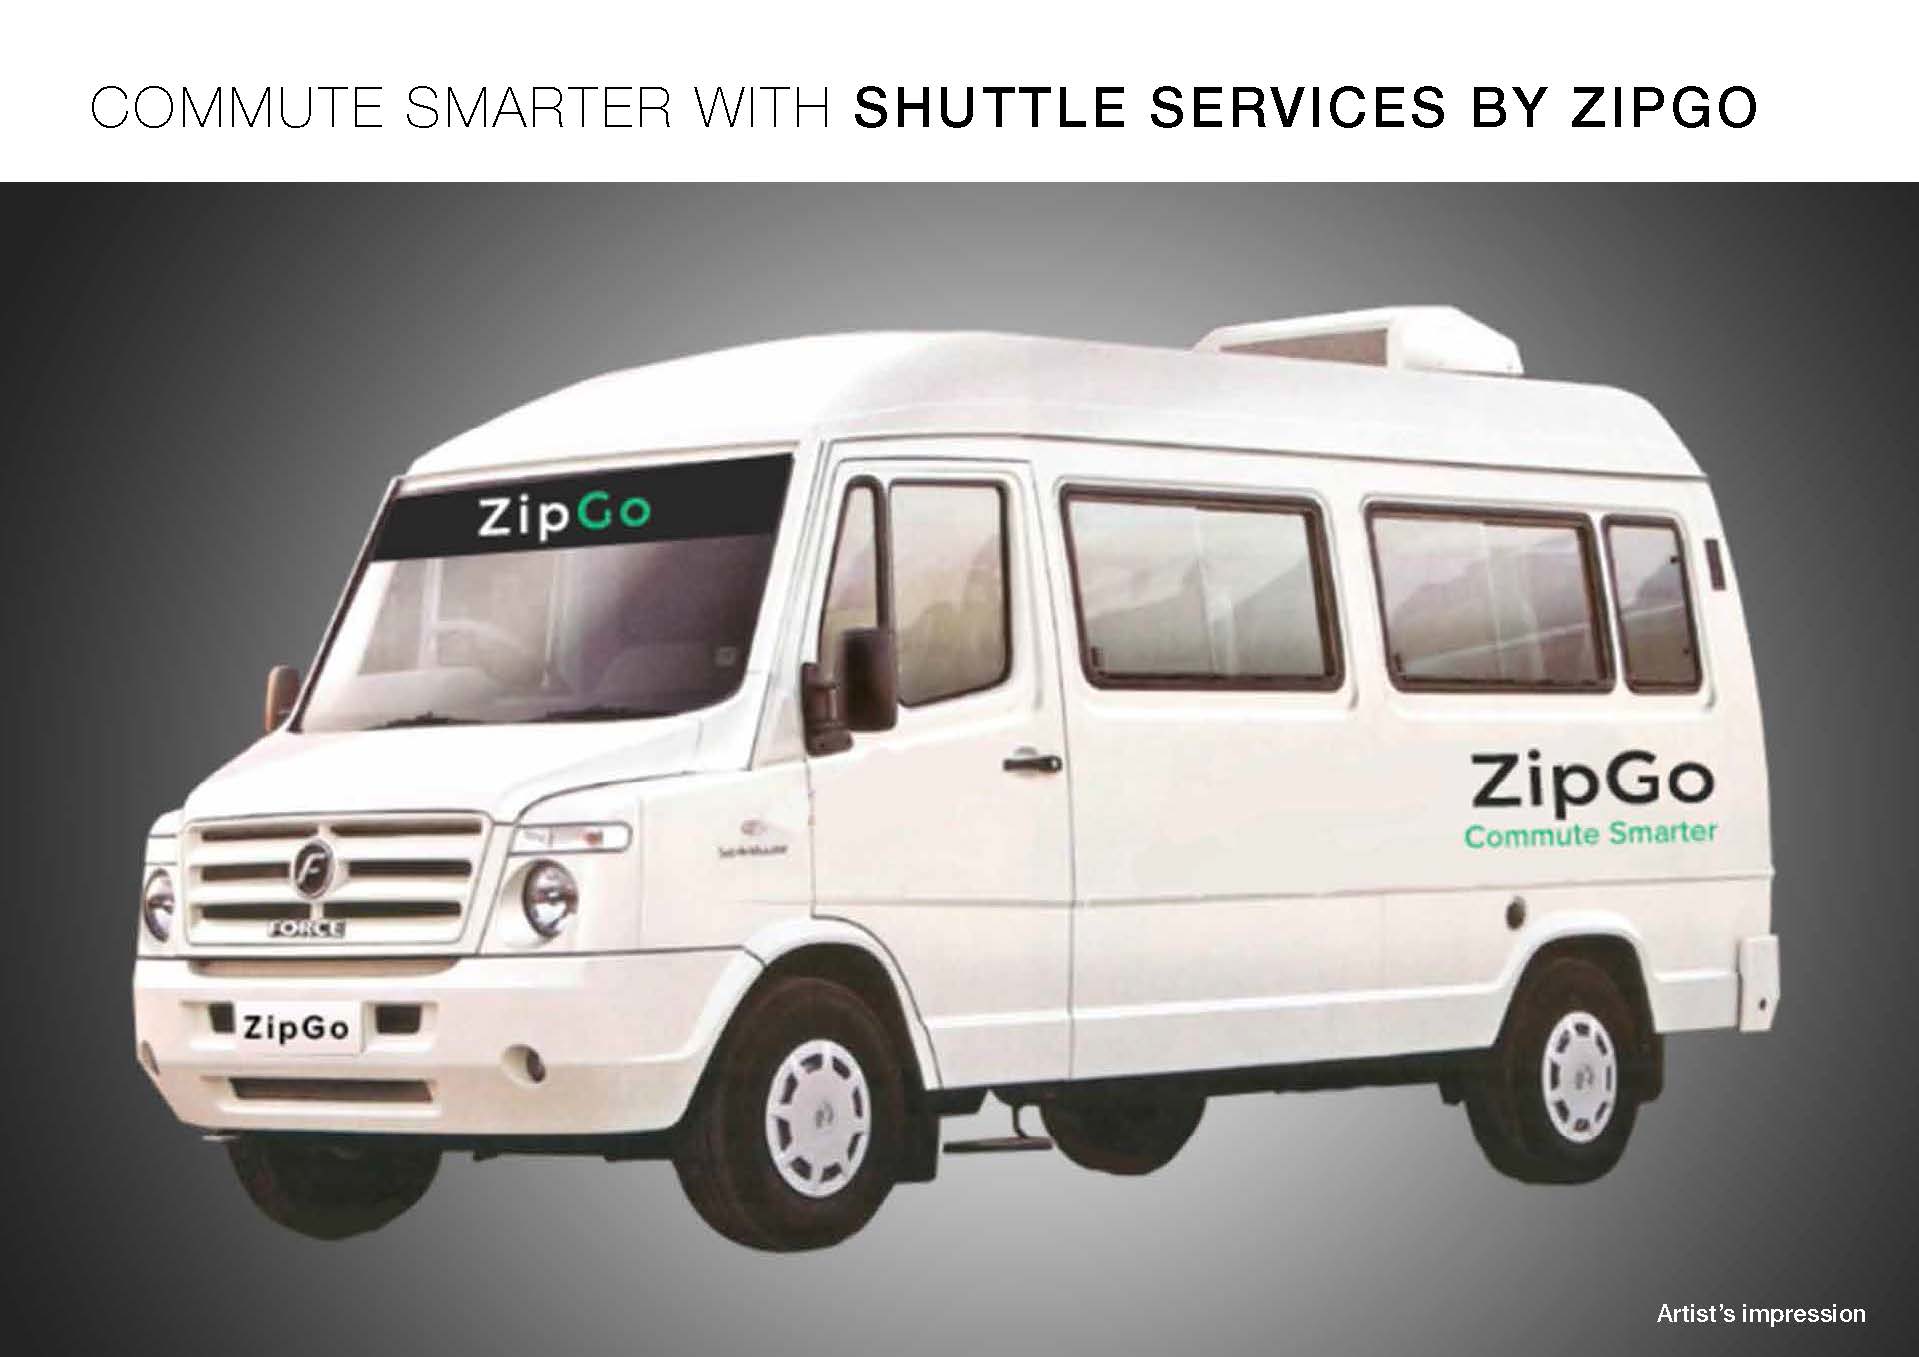 Commute smarter with shuttle services by Zipgo at Godrej Summit